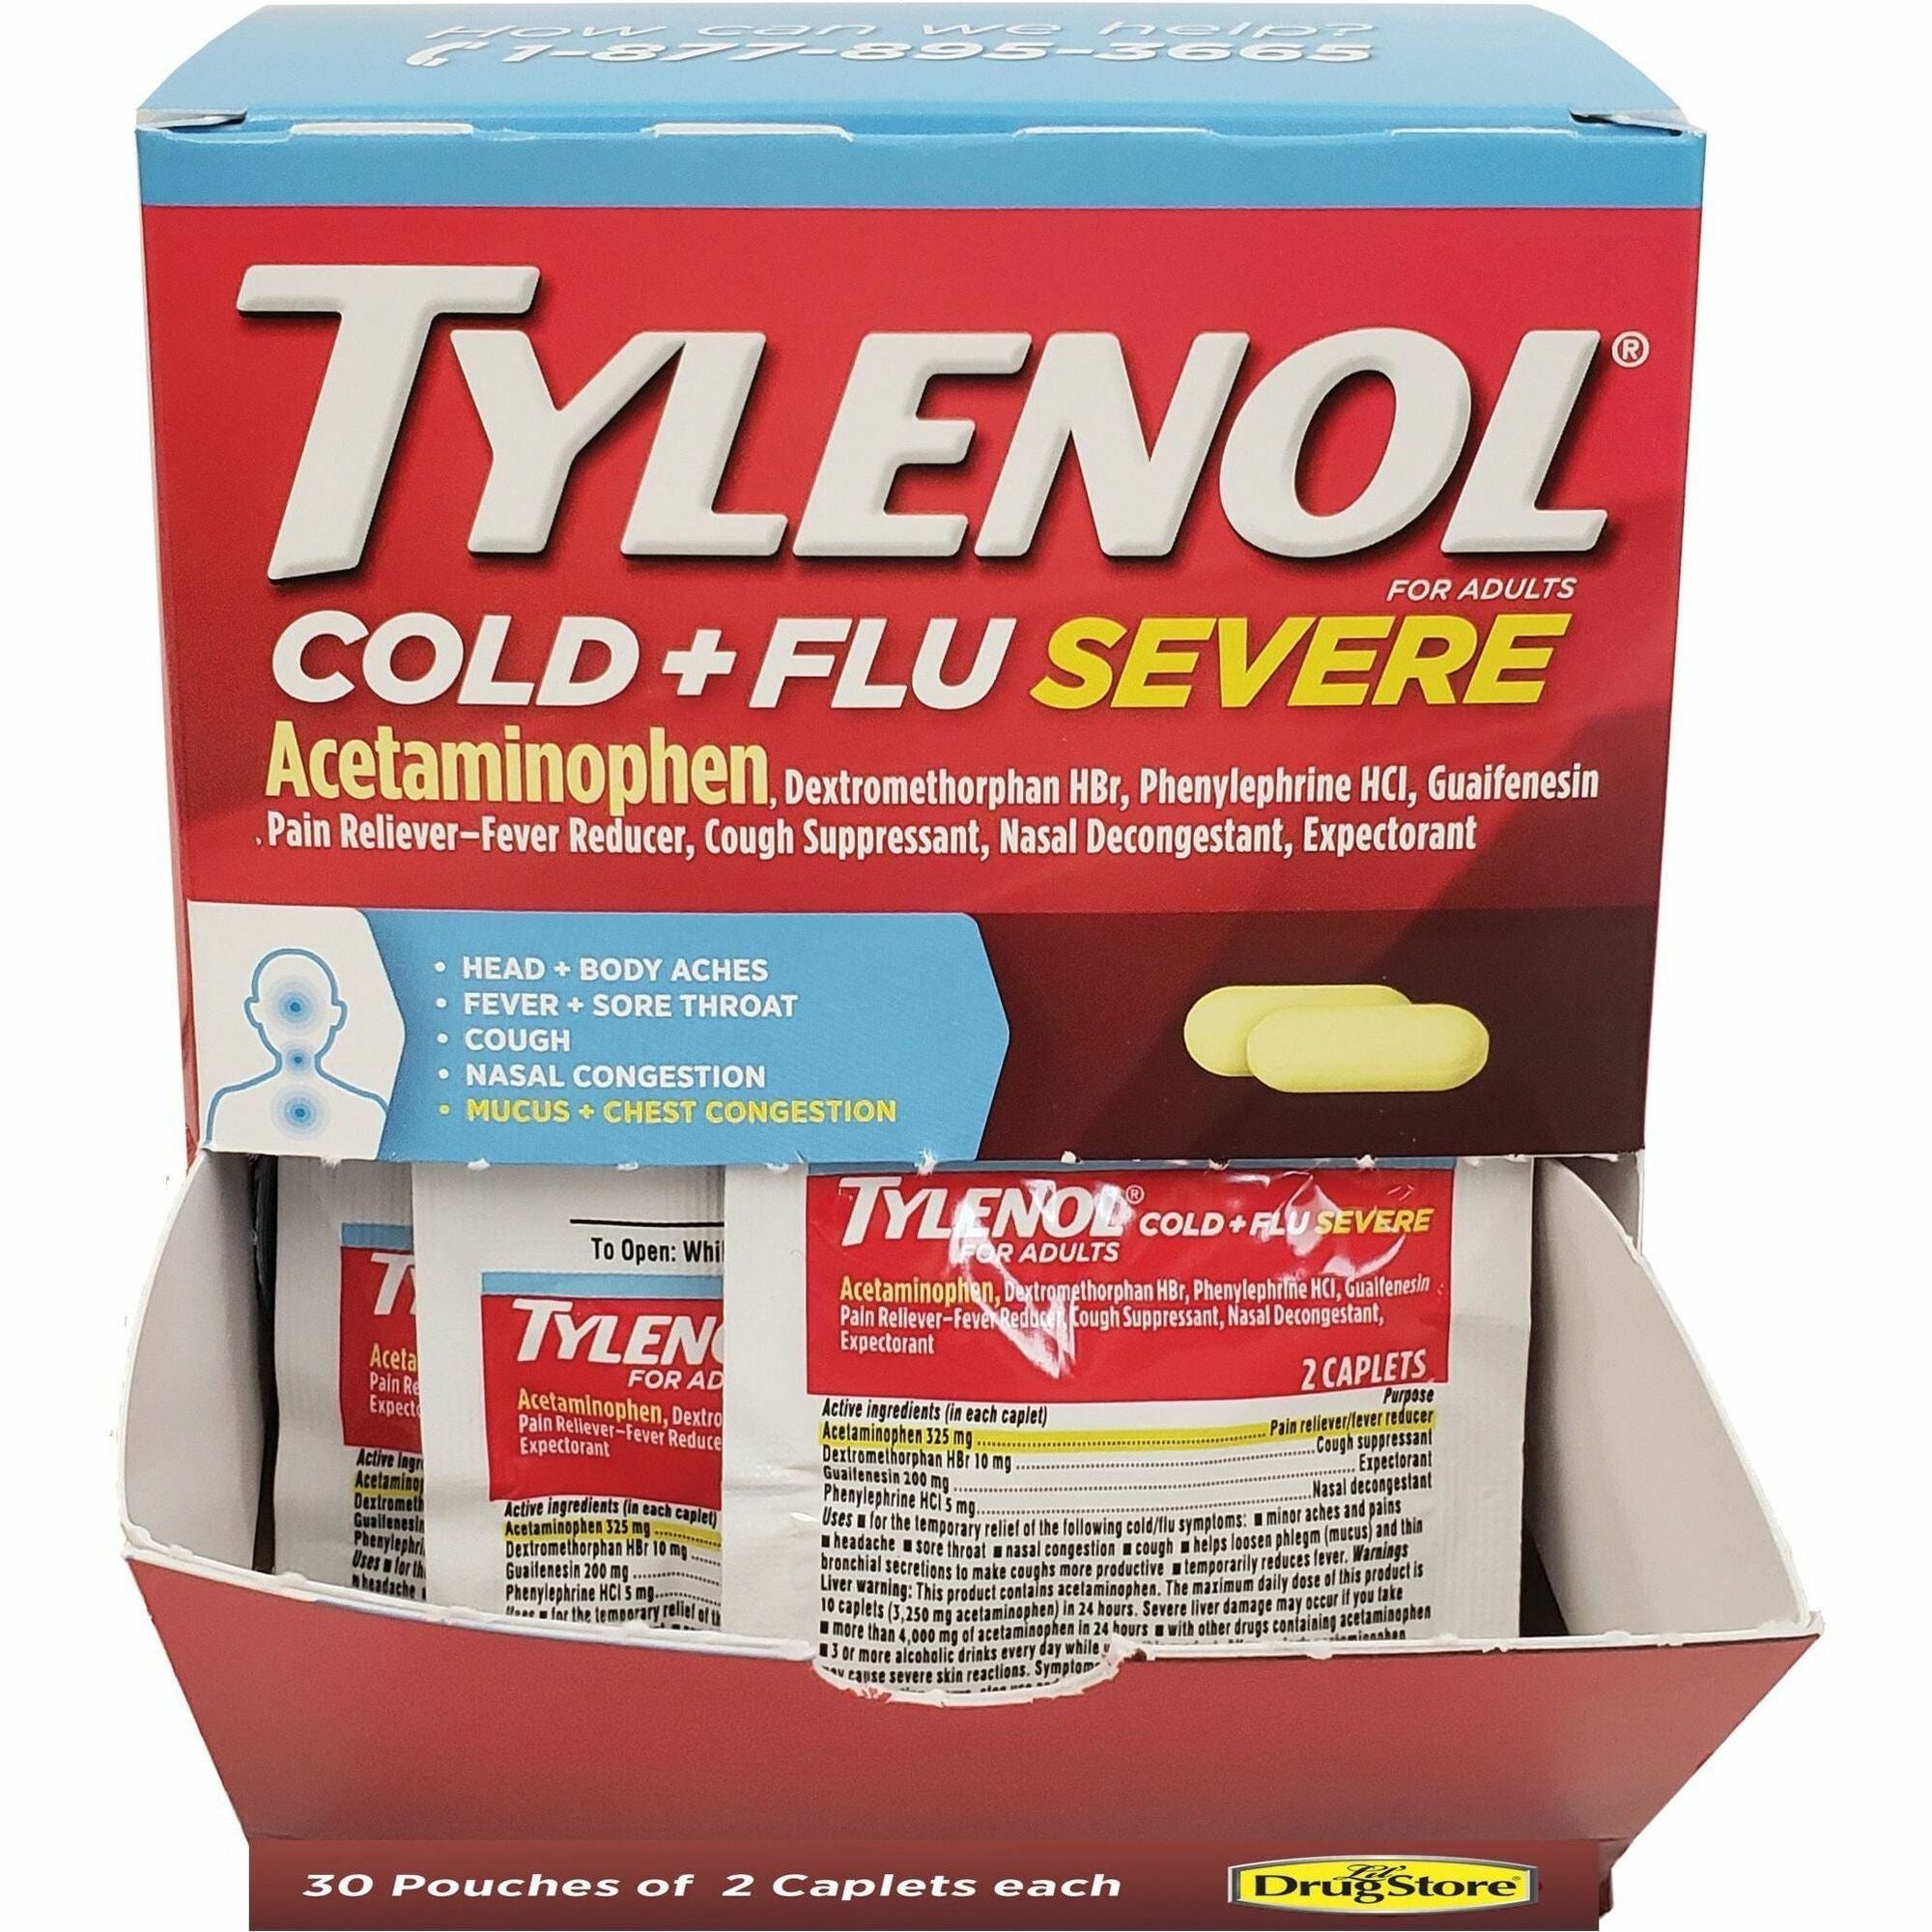 Tylenol Cold & Flu Severe Single-Dose Packets - For Tylenol Cold, Flu, Fever, Body Ache, Pain, Headache, Sore Throat, Nasal Congestion, Cough - 30 / BoxPacket - 1